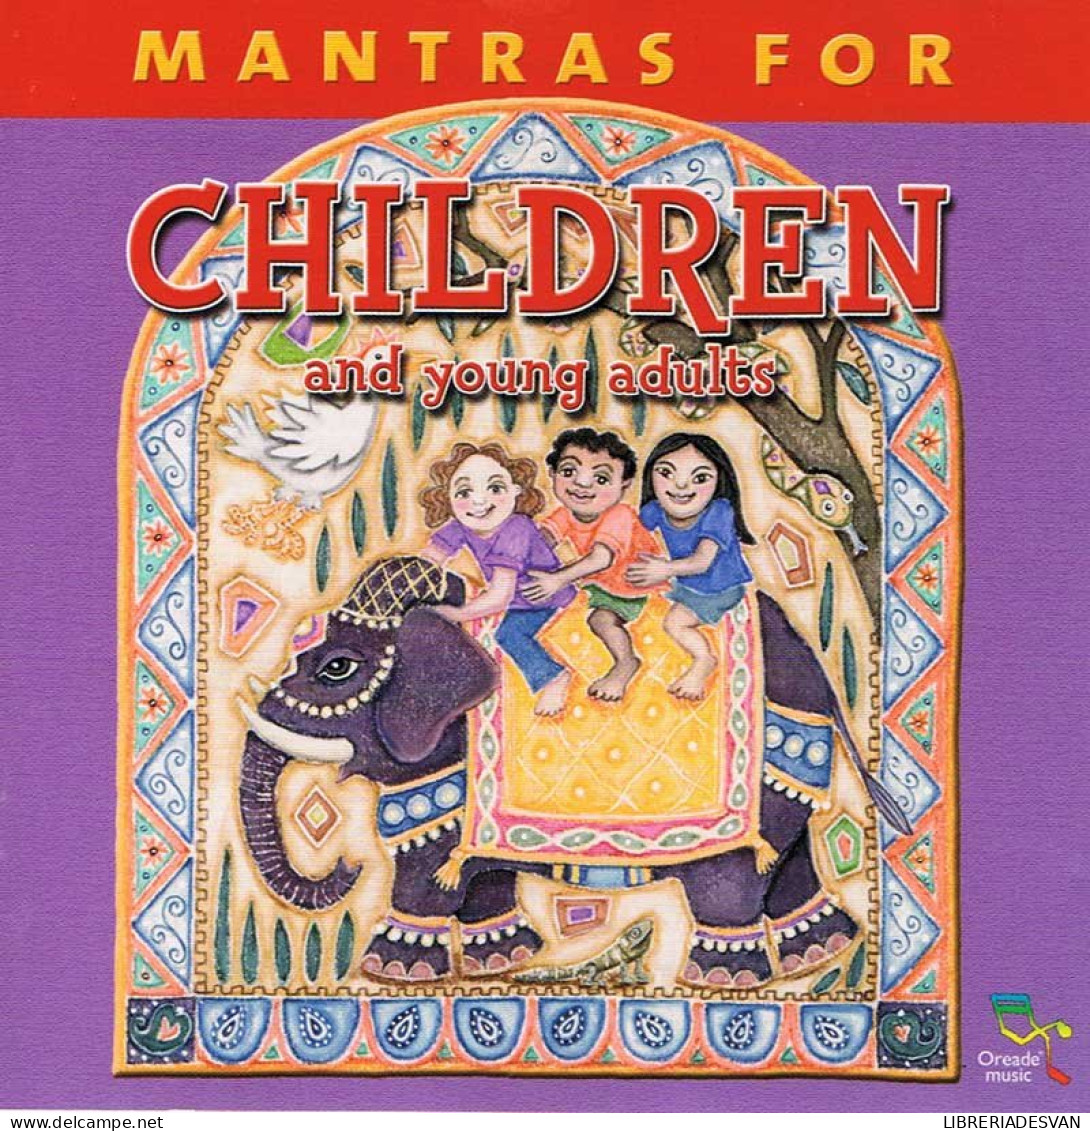 Mantras For Children And Young Adults. CD - New Age